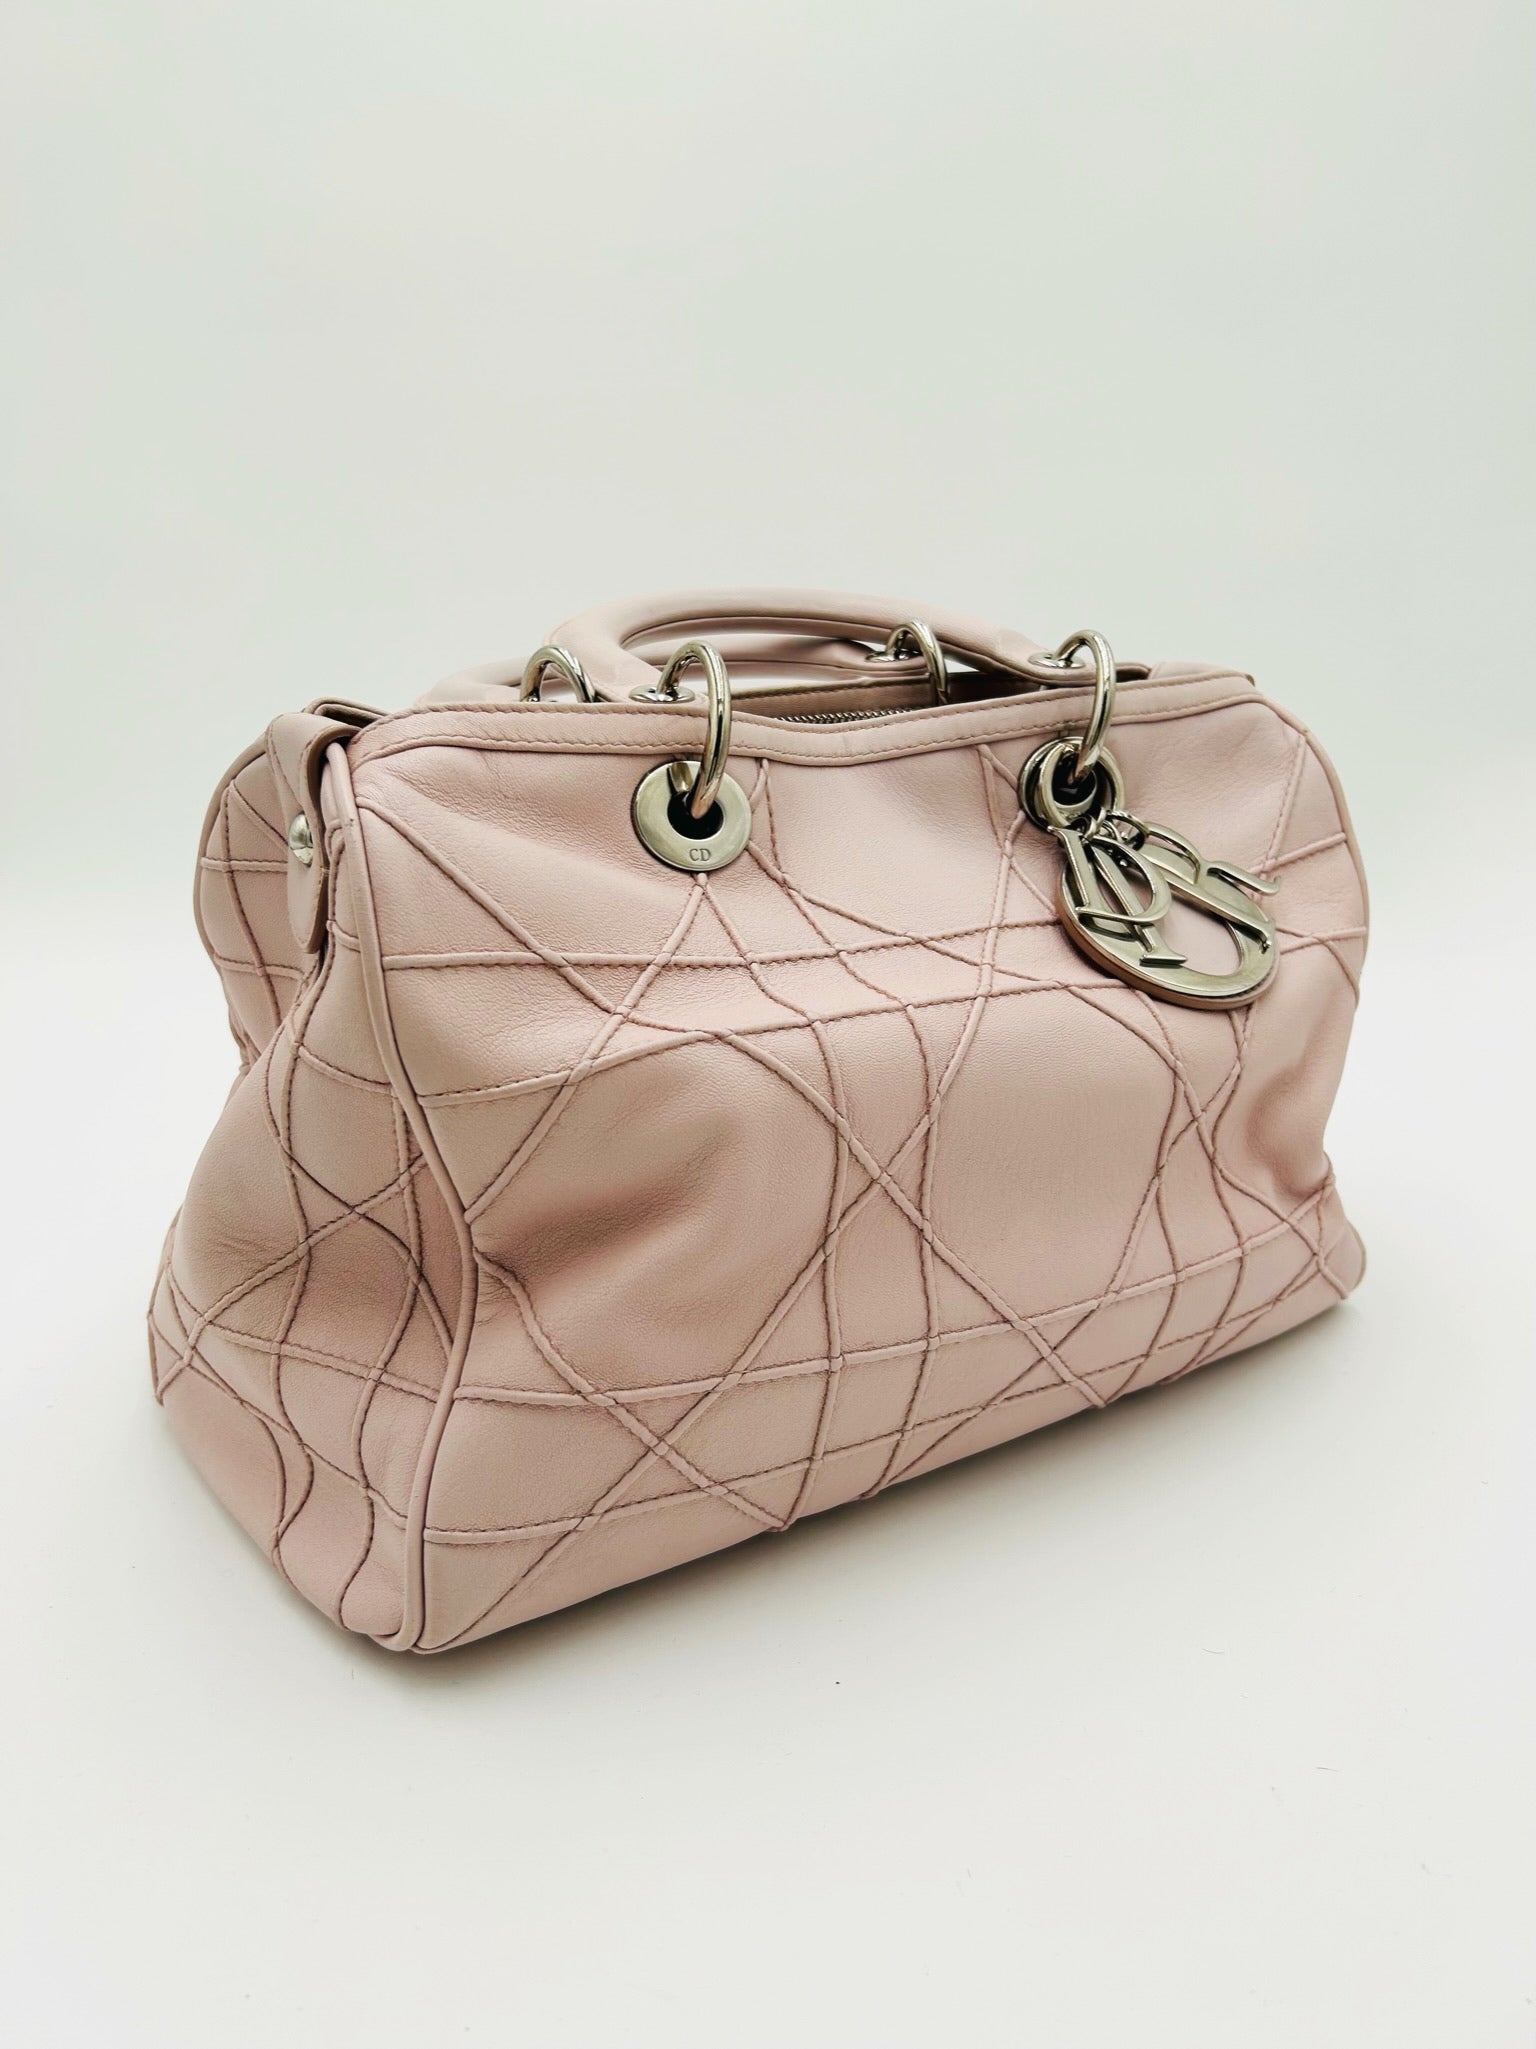 CHRISTIAN DIOR BLUSH PINK CANNAGE LEATHER GRANVILLE POLOCHON SATCHEL